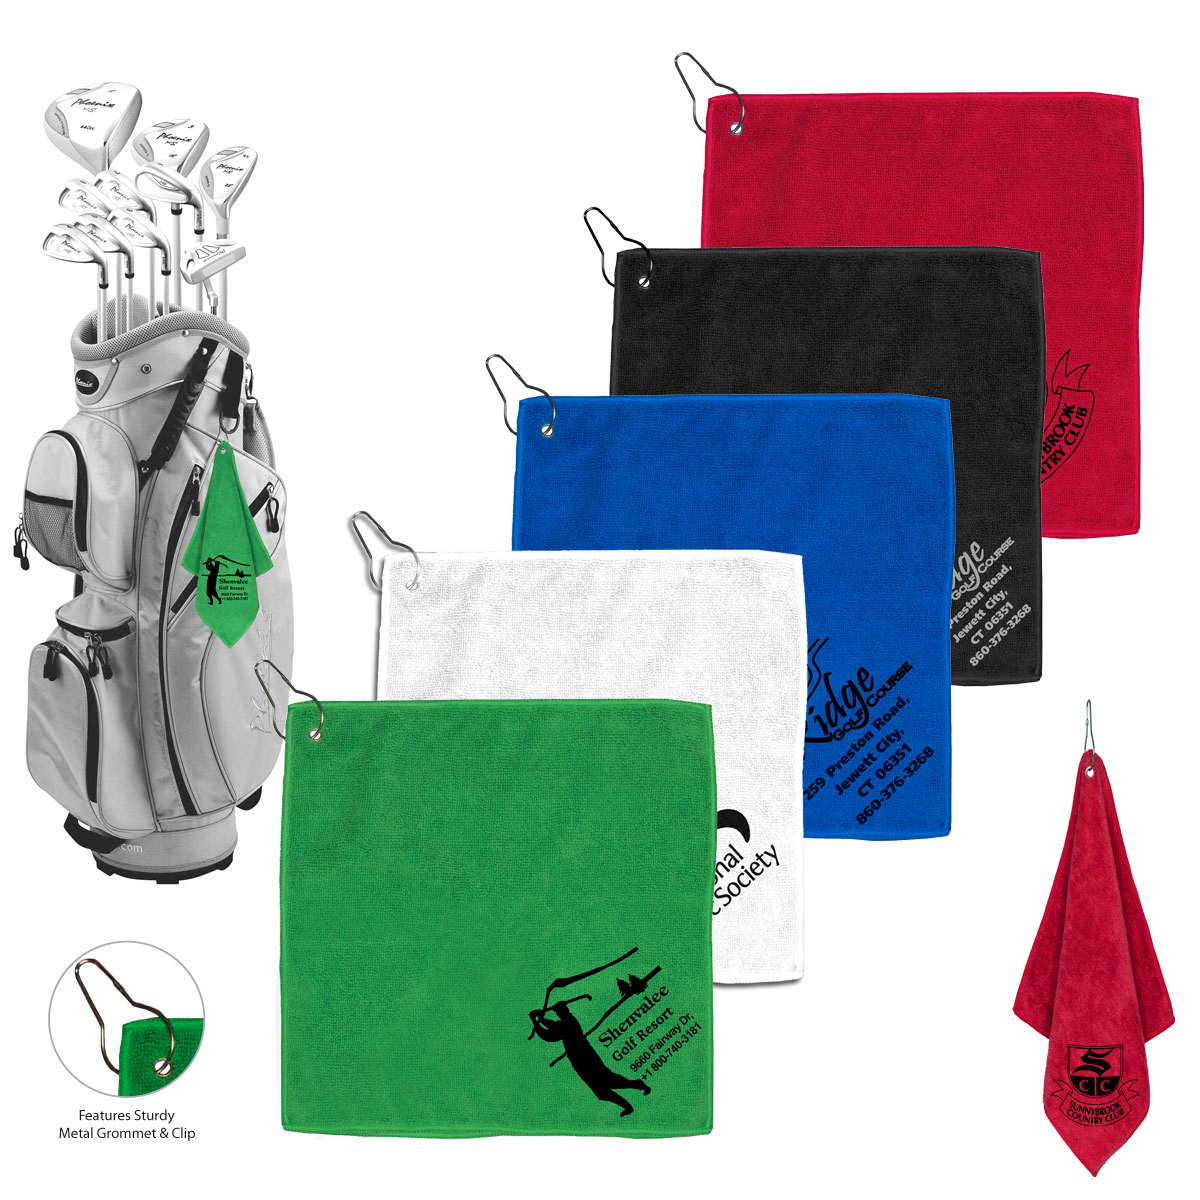 300GSM Microfiber Golf Towel with Metal Grommet and Clip B5130